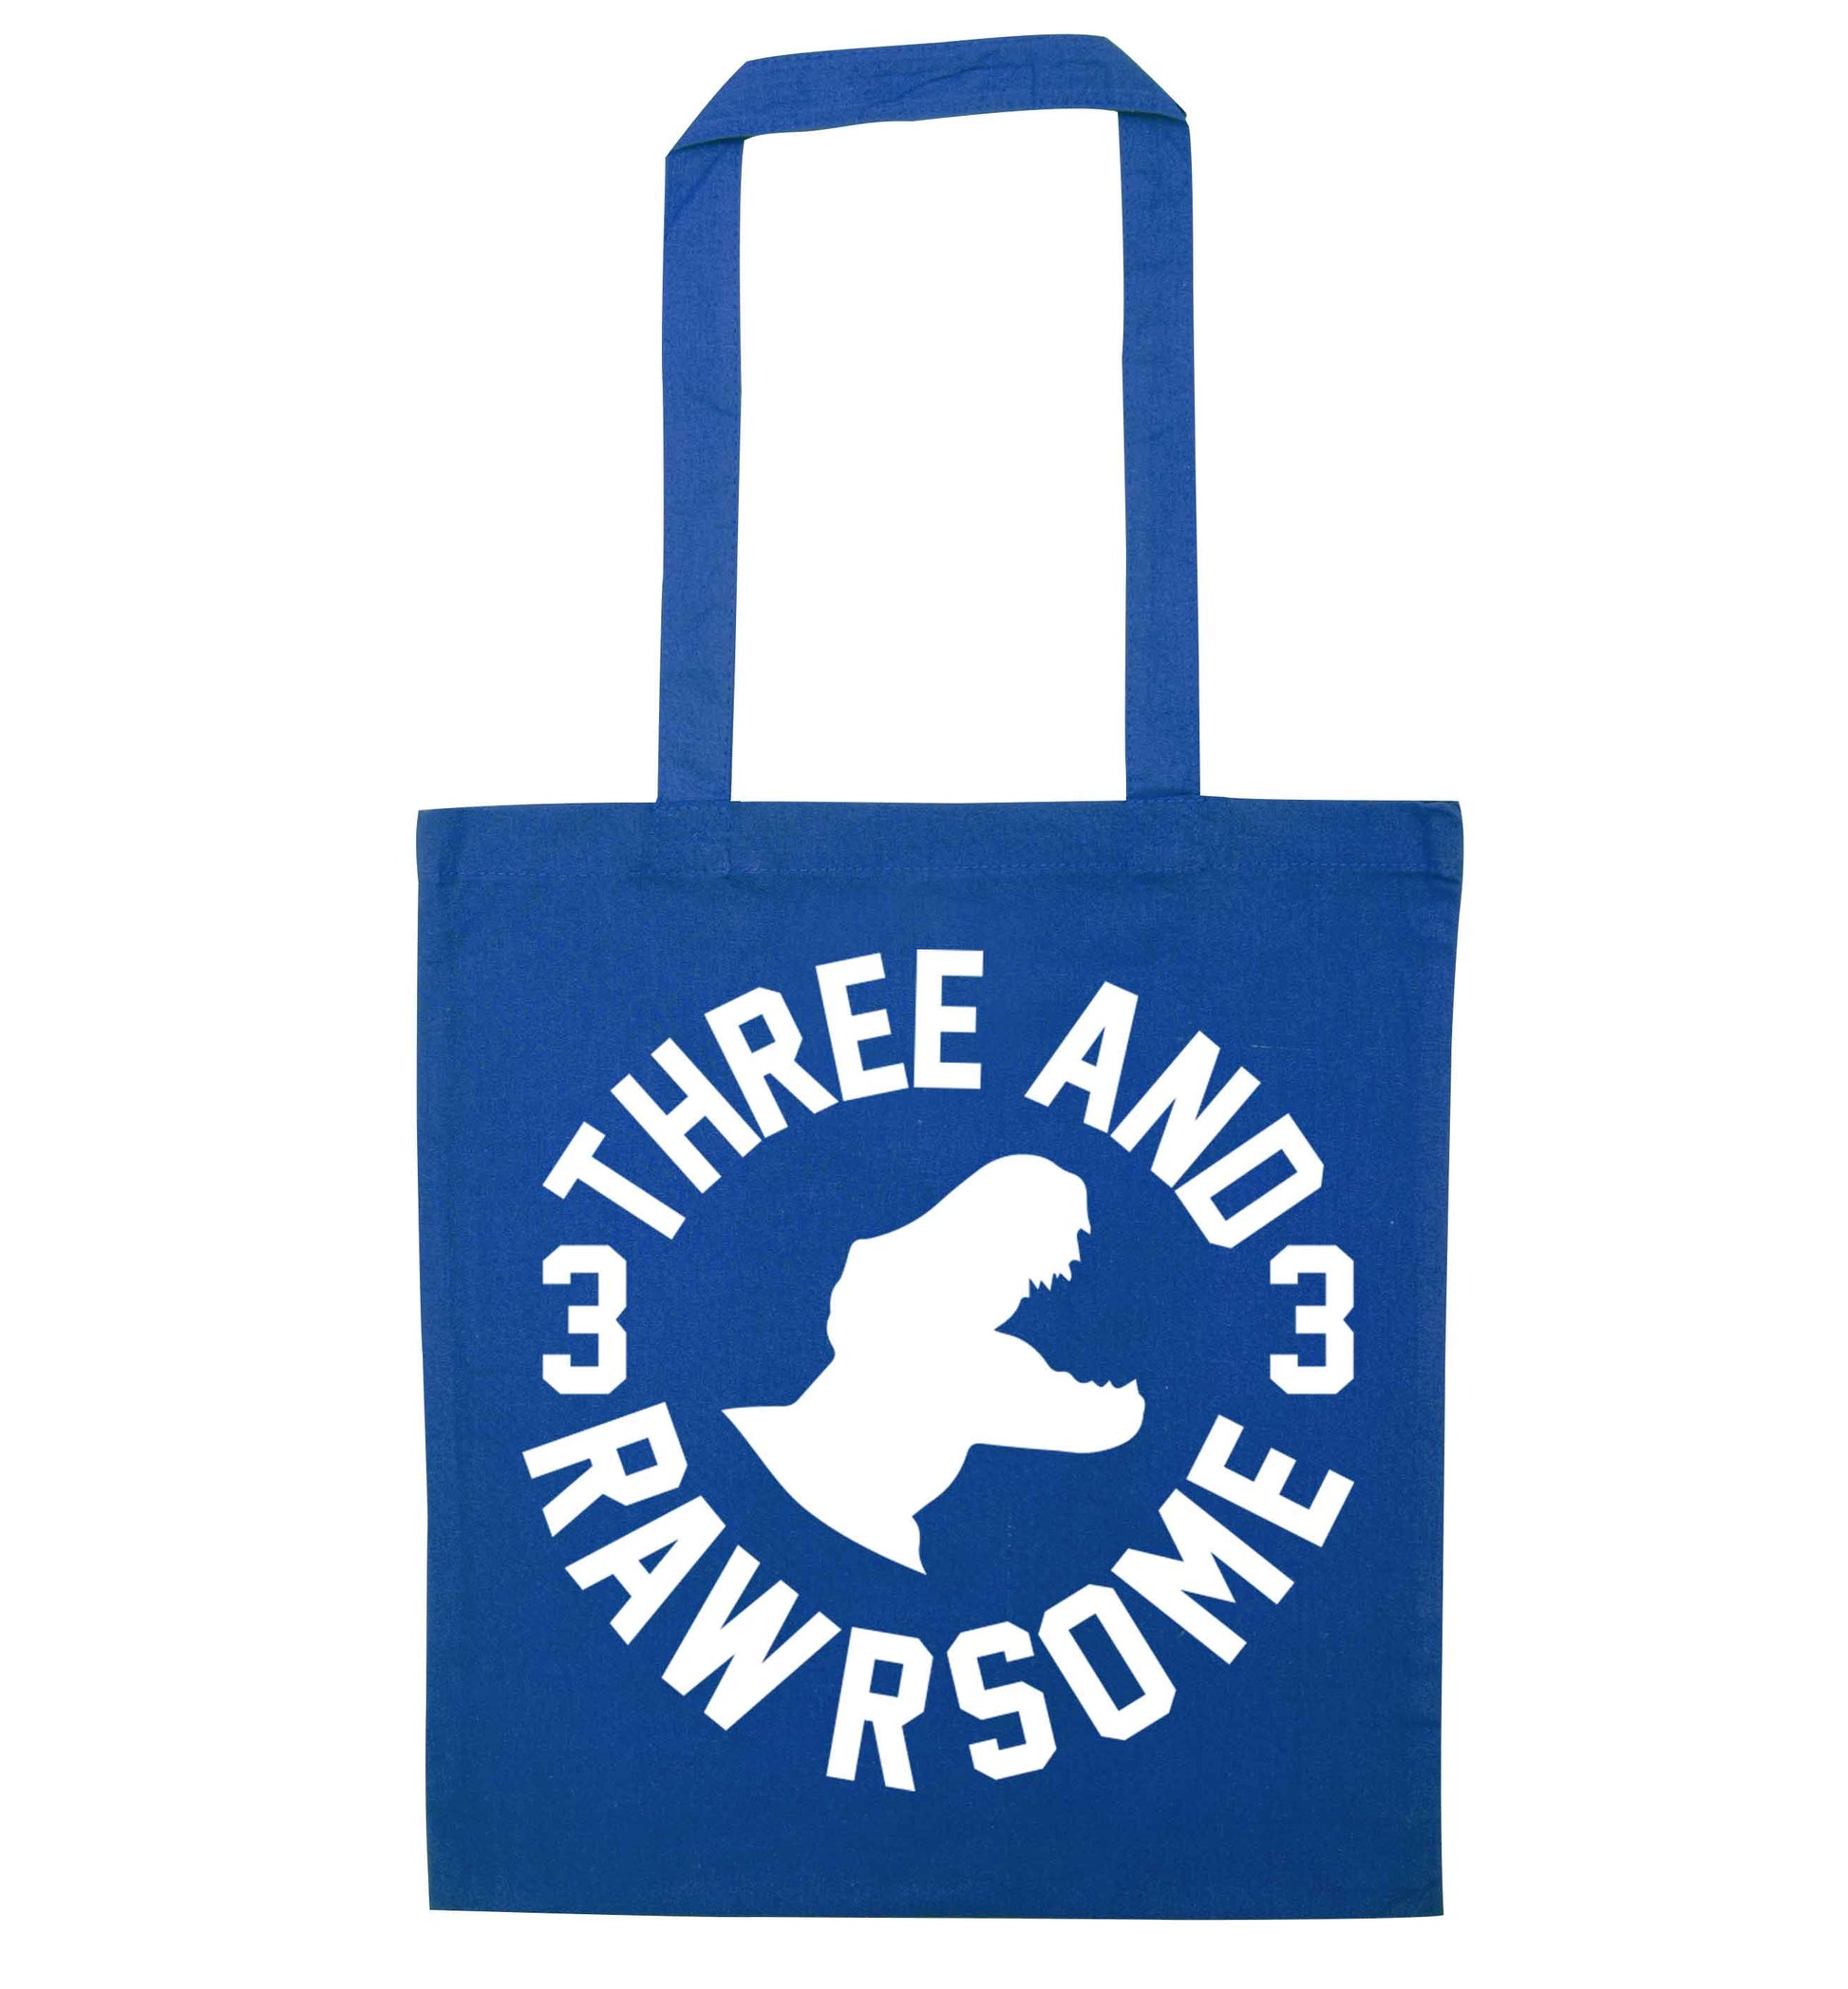 Three and rawrsome blue tote bag